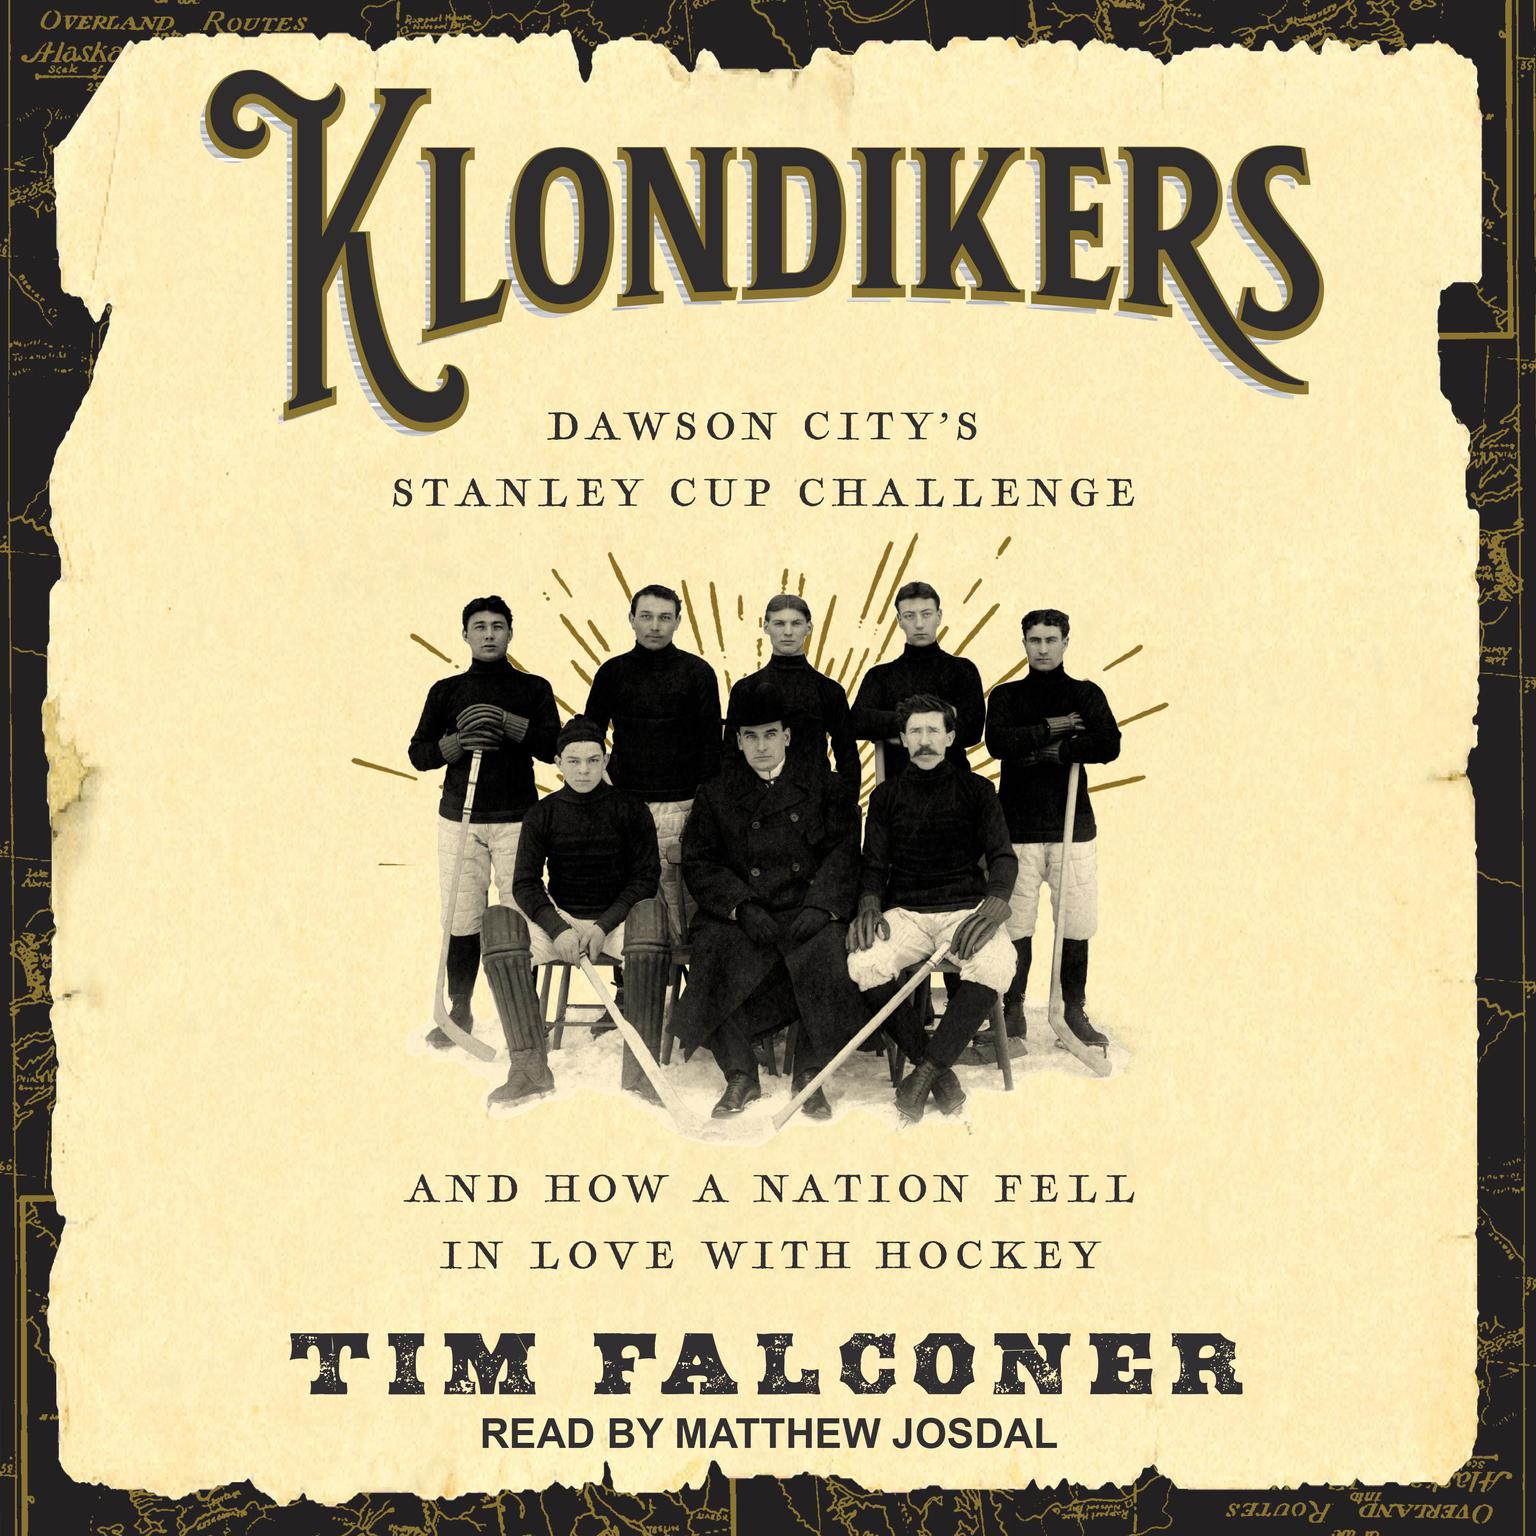 Klondikers: Dawson Citys Stanley Cup Challenge and How a Nation Fell in Love with Hockey Audiobook, by Tim Falconer